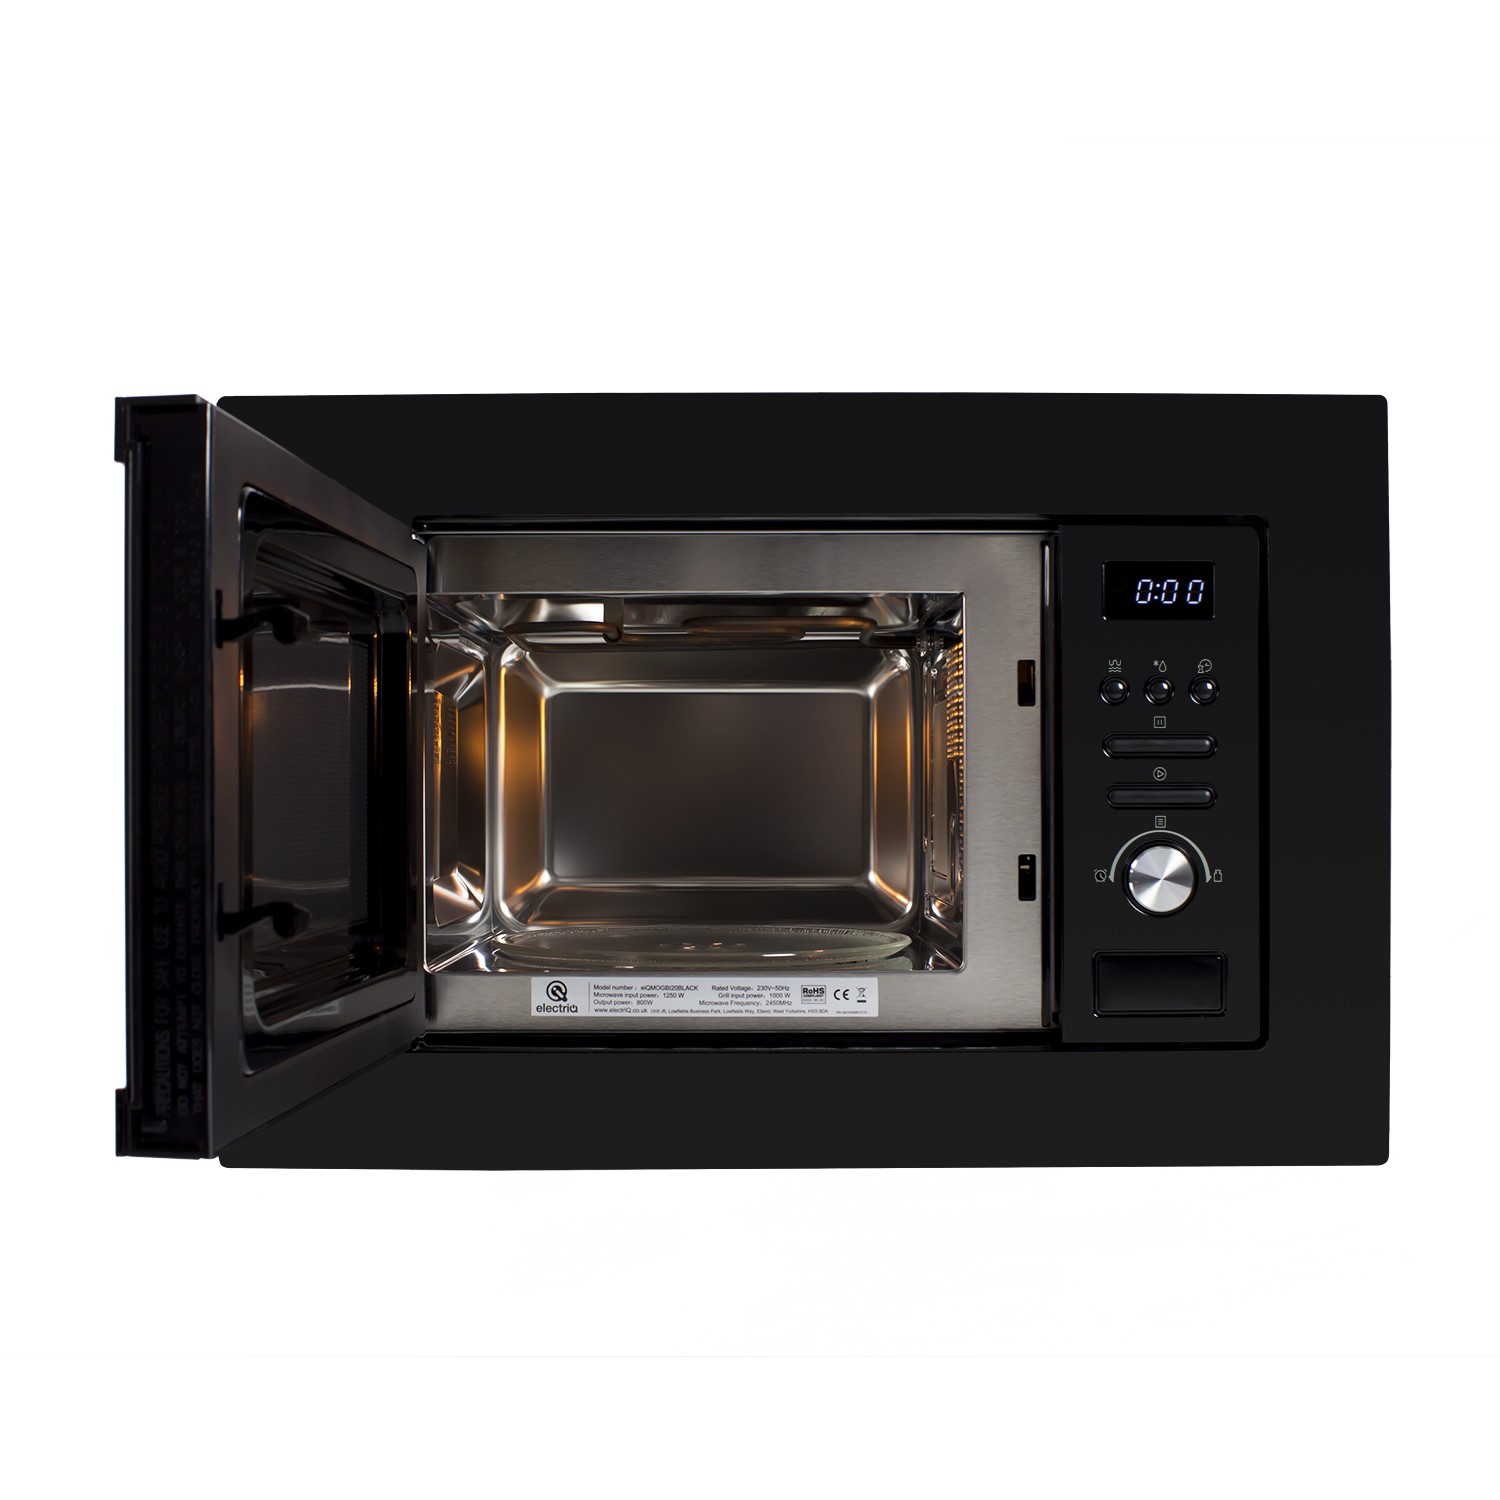 ElectrIQ 20L Built-in Microwave with Grill Black